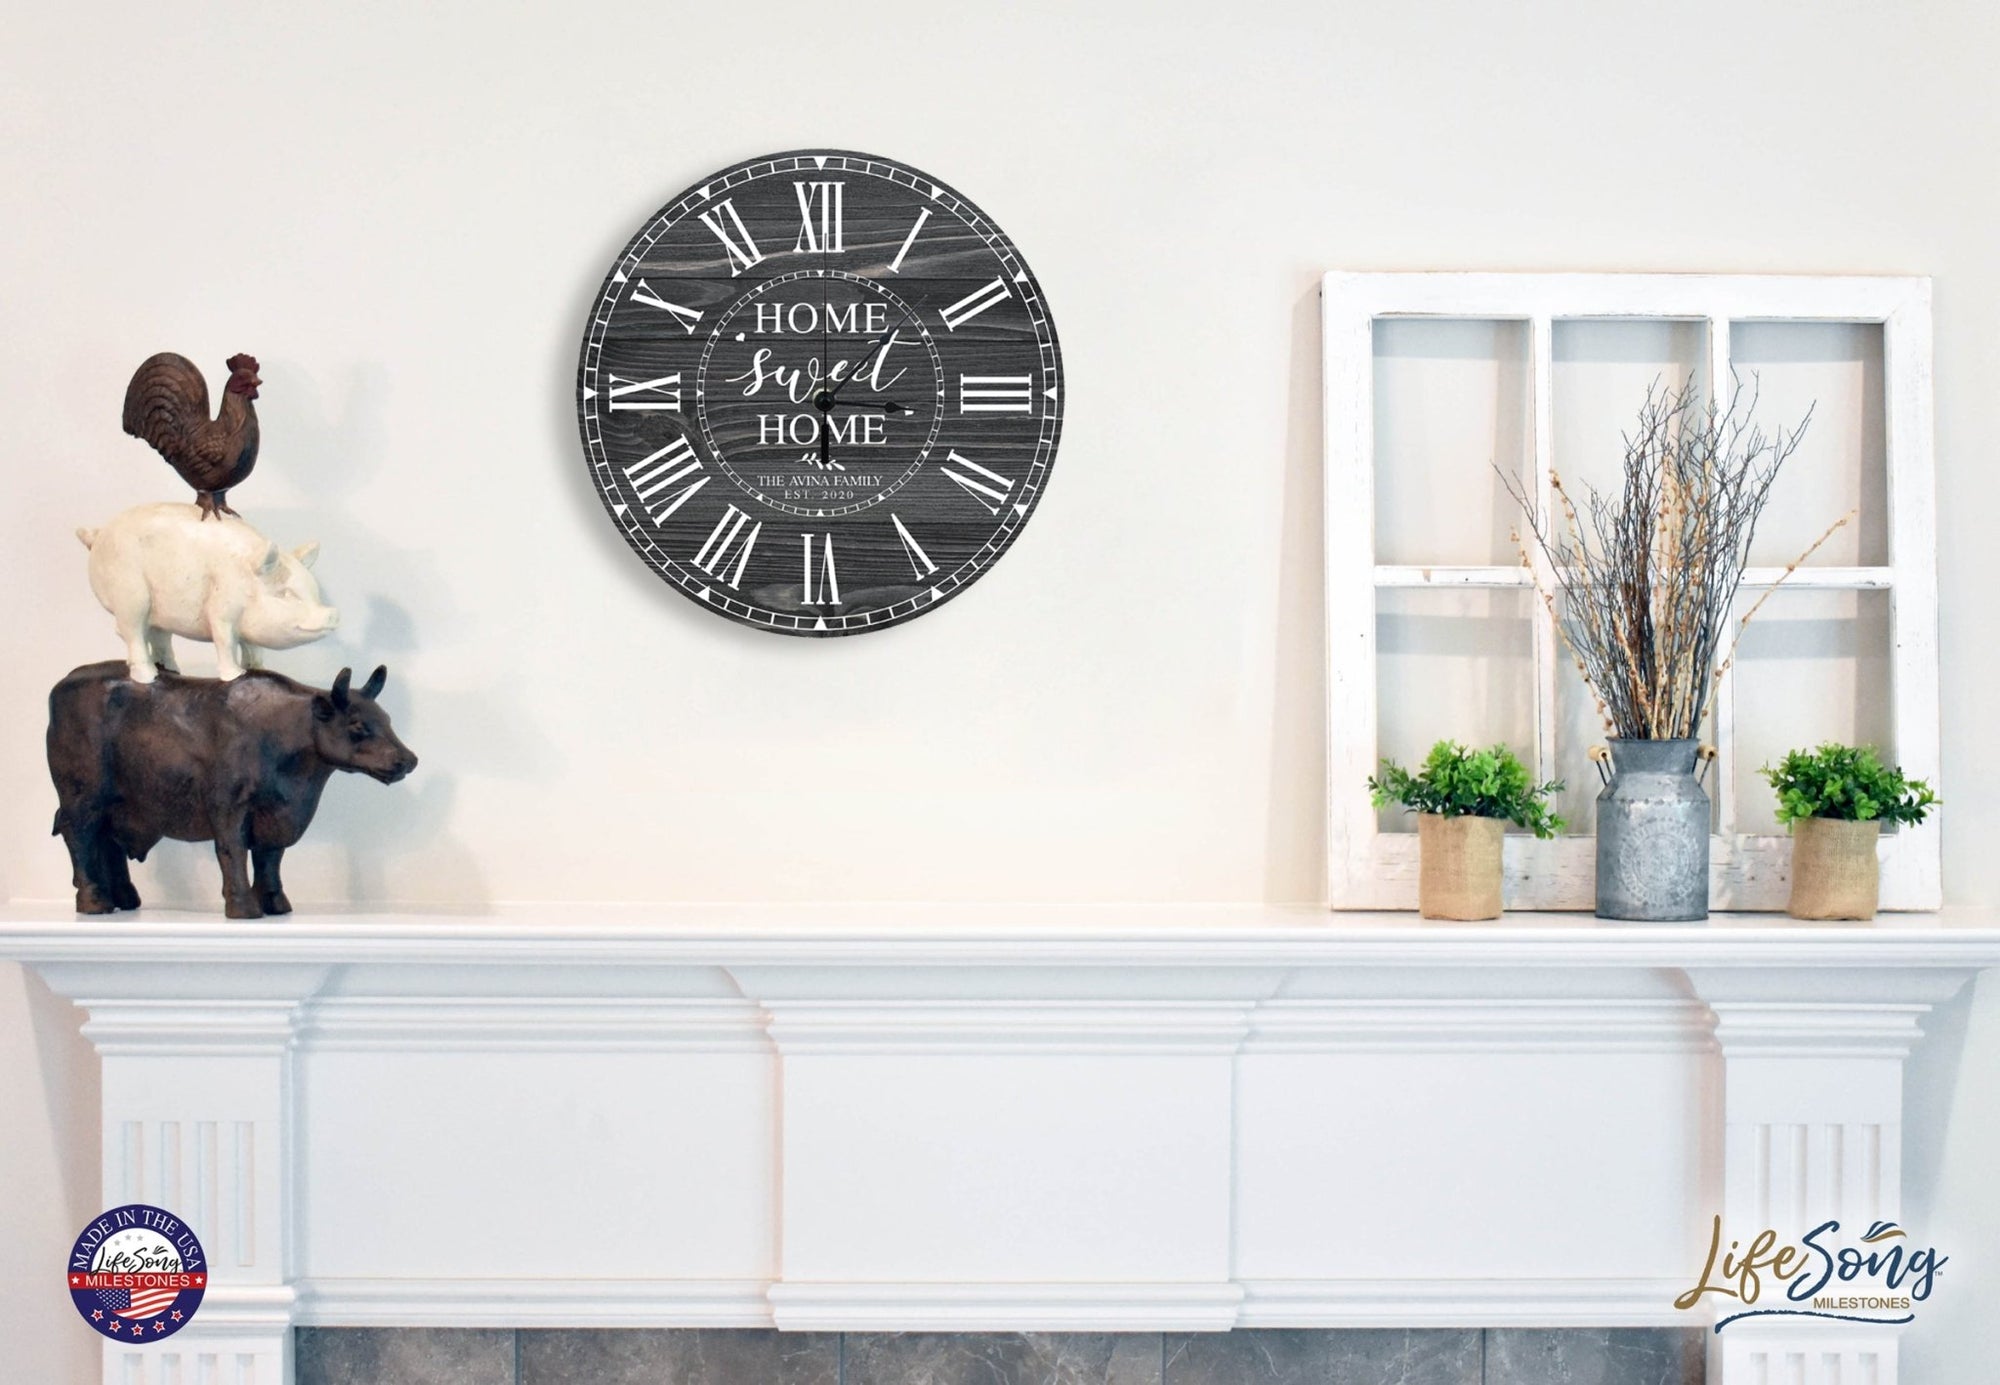 Personalized Inspirational Everyday Home and Family Wall Clock 12 x 12 x 0.125-(Home Sweet Home) - LifeSong Milestones